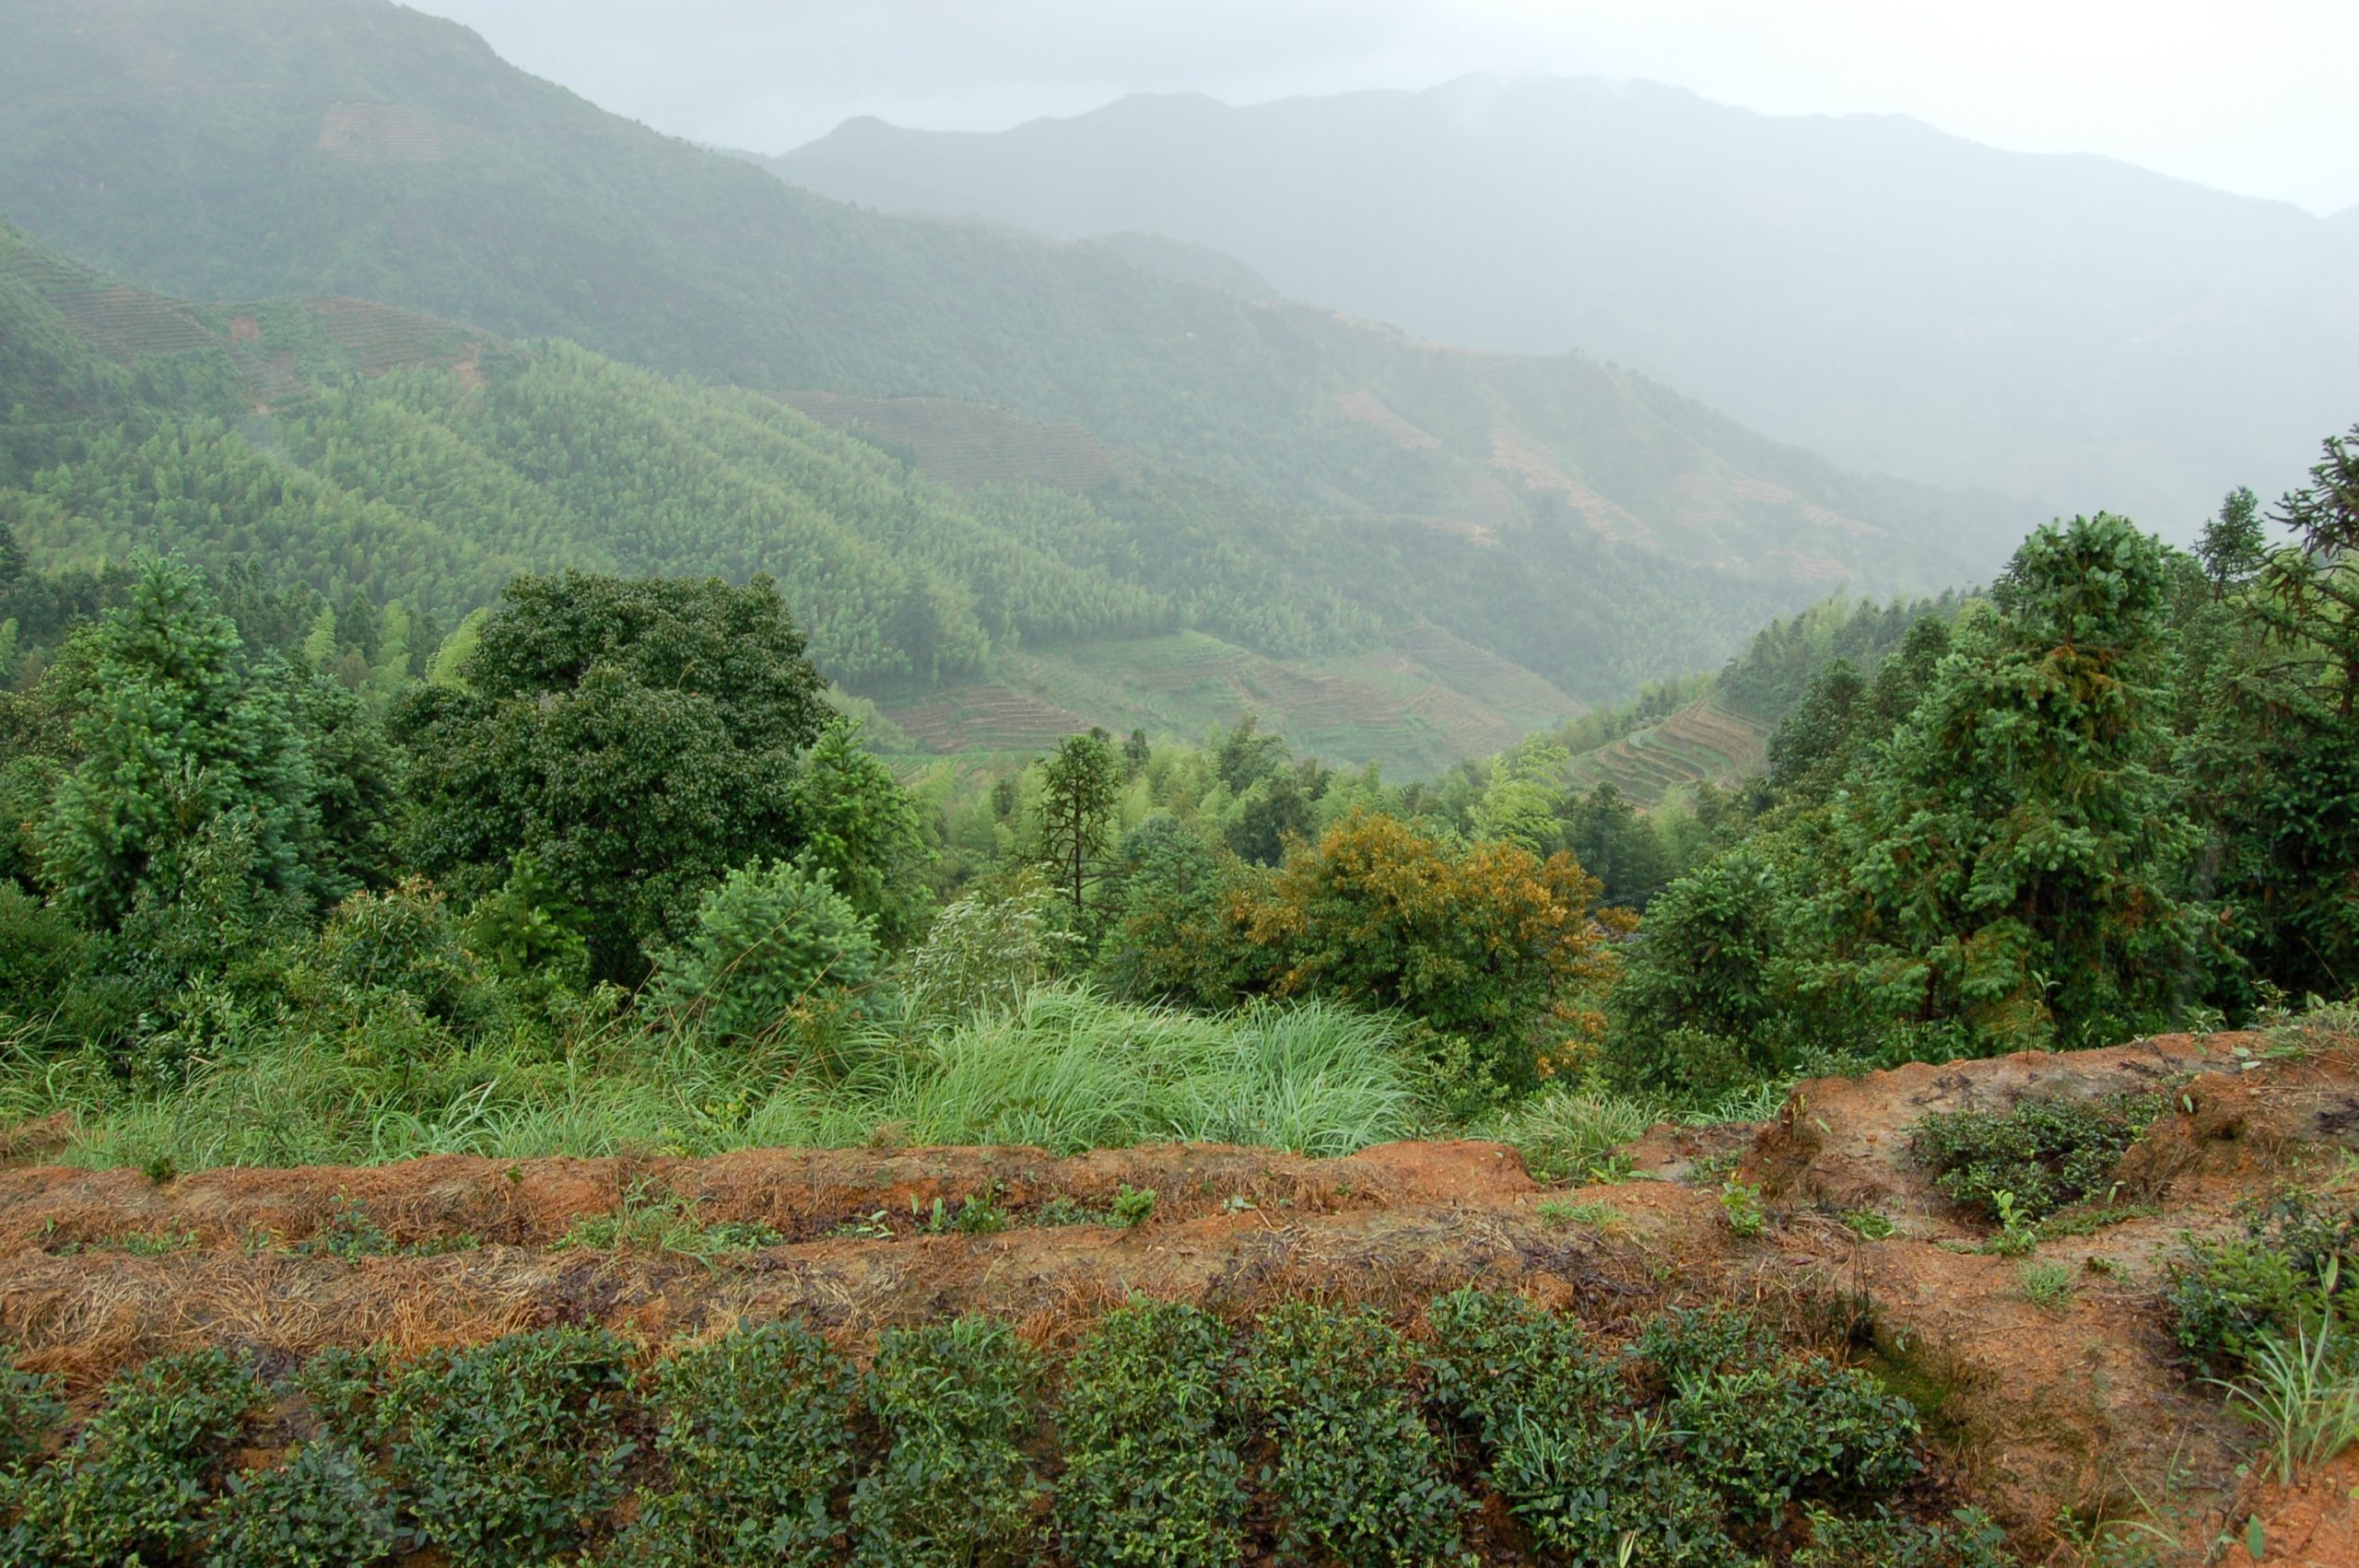 A few rows of wulong tea terraces surrounded by forest in the misty green mountains of Anxi.